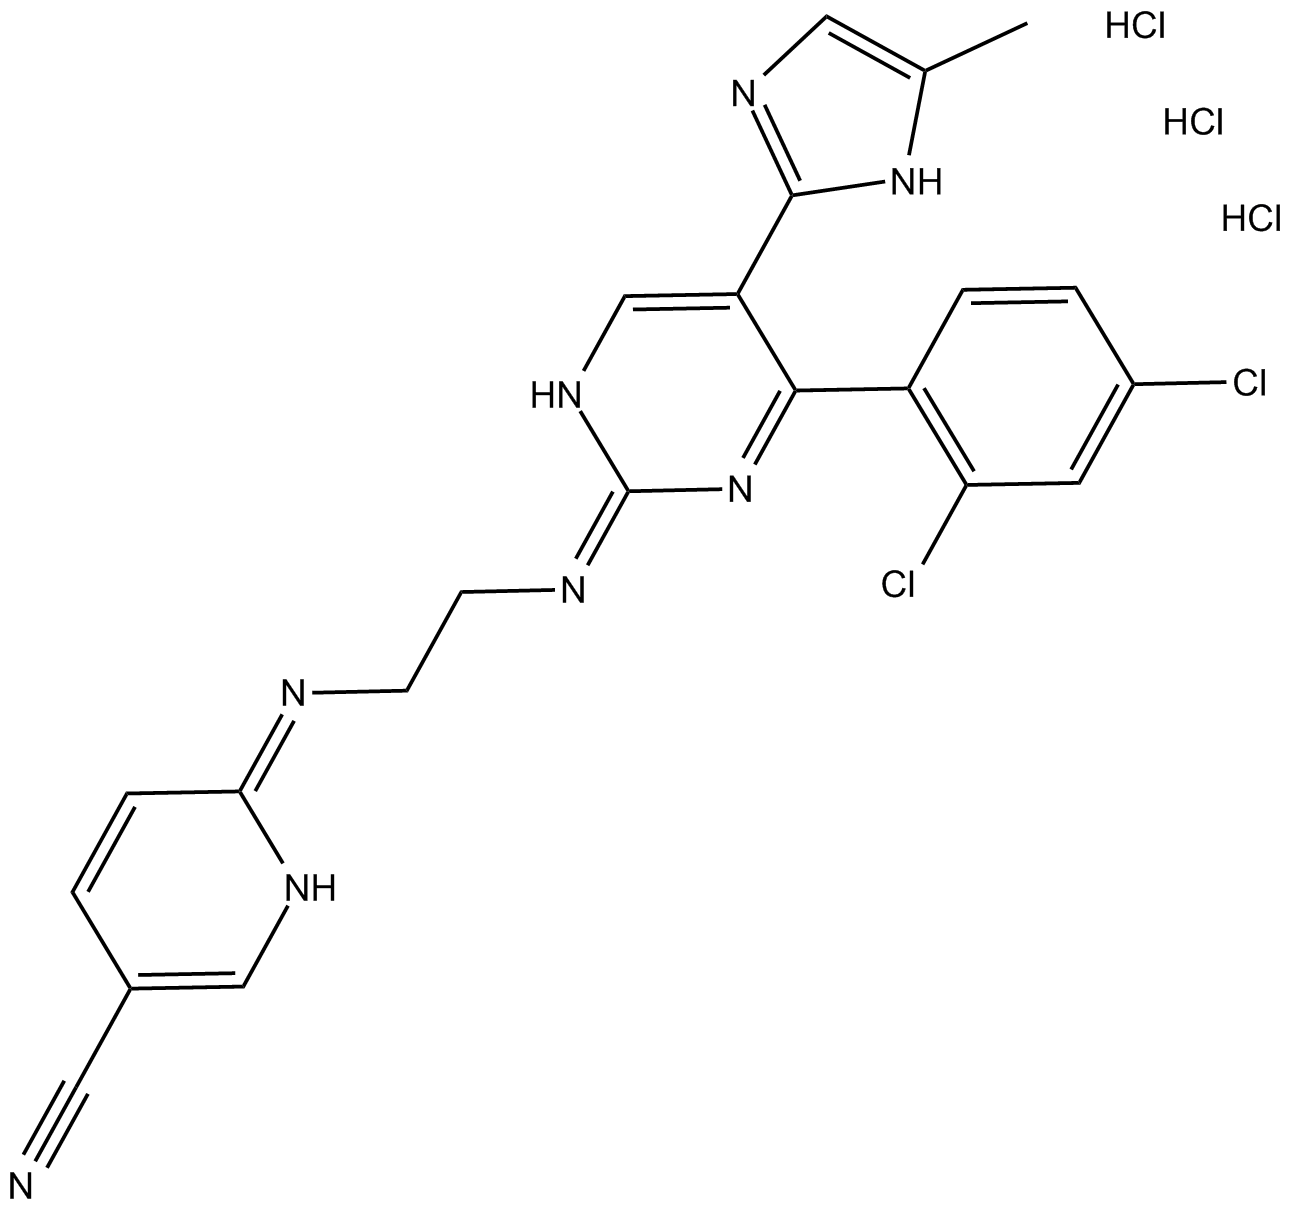 CHIR 99021 trihydrochloride  Chemical Structure